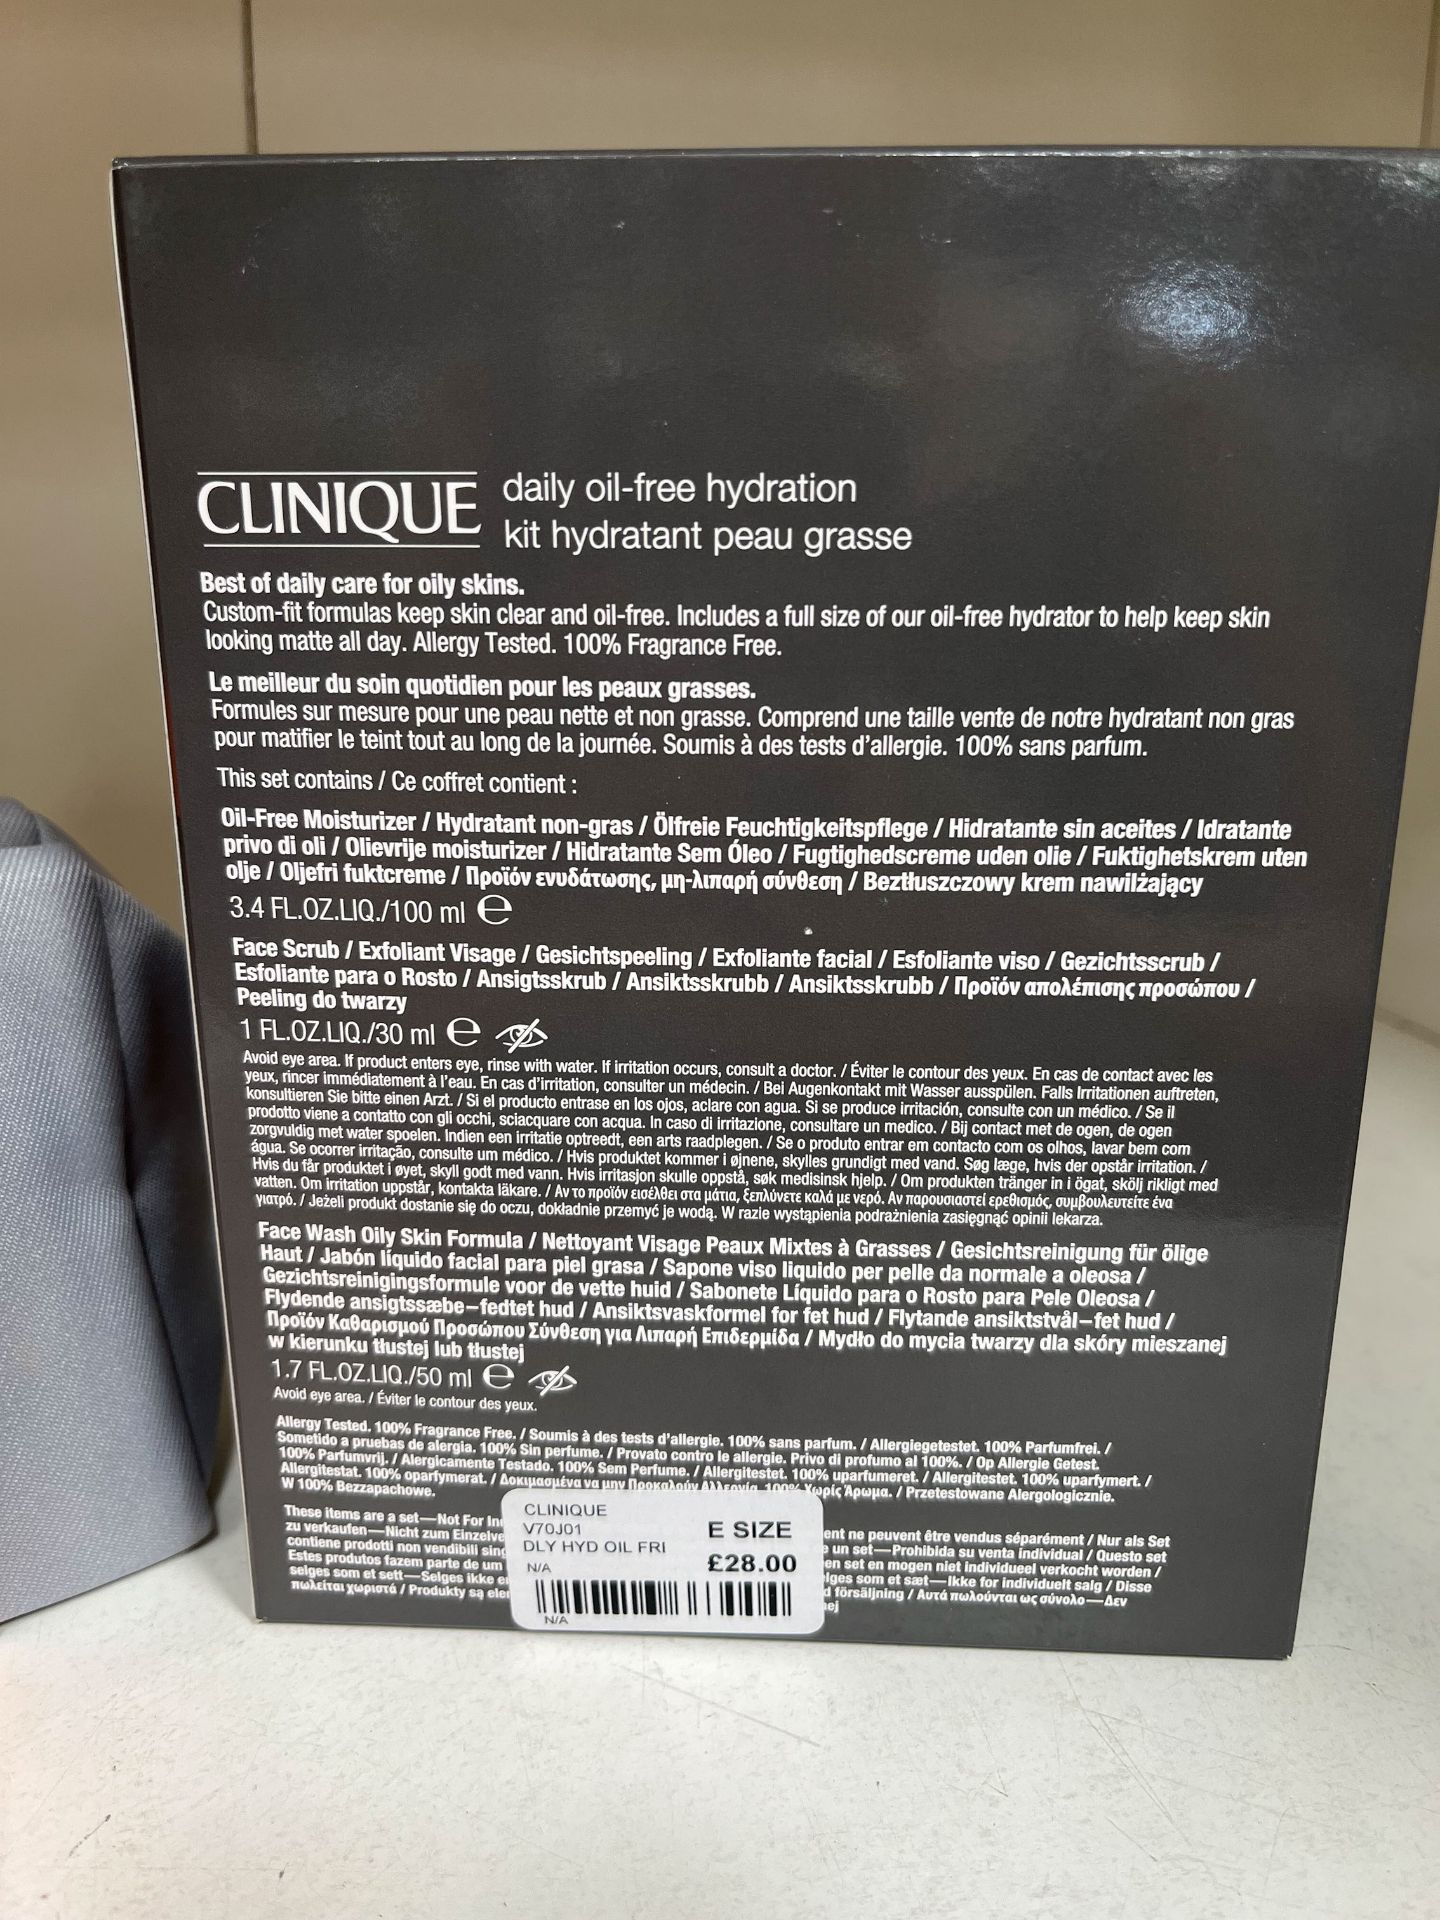 2x Clinique for Men Gift Sets - Image 2 of 4